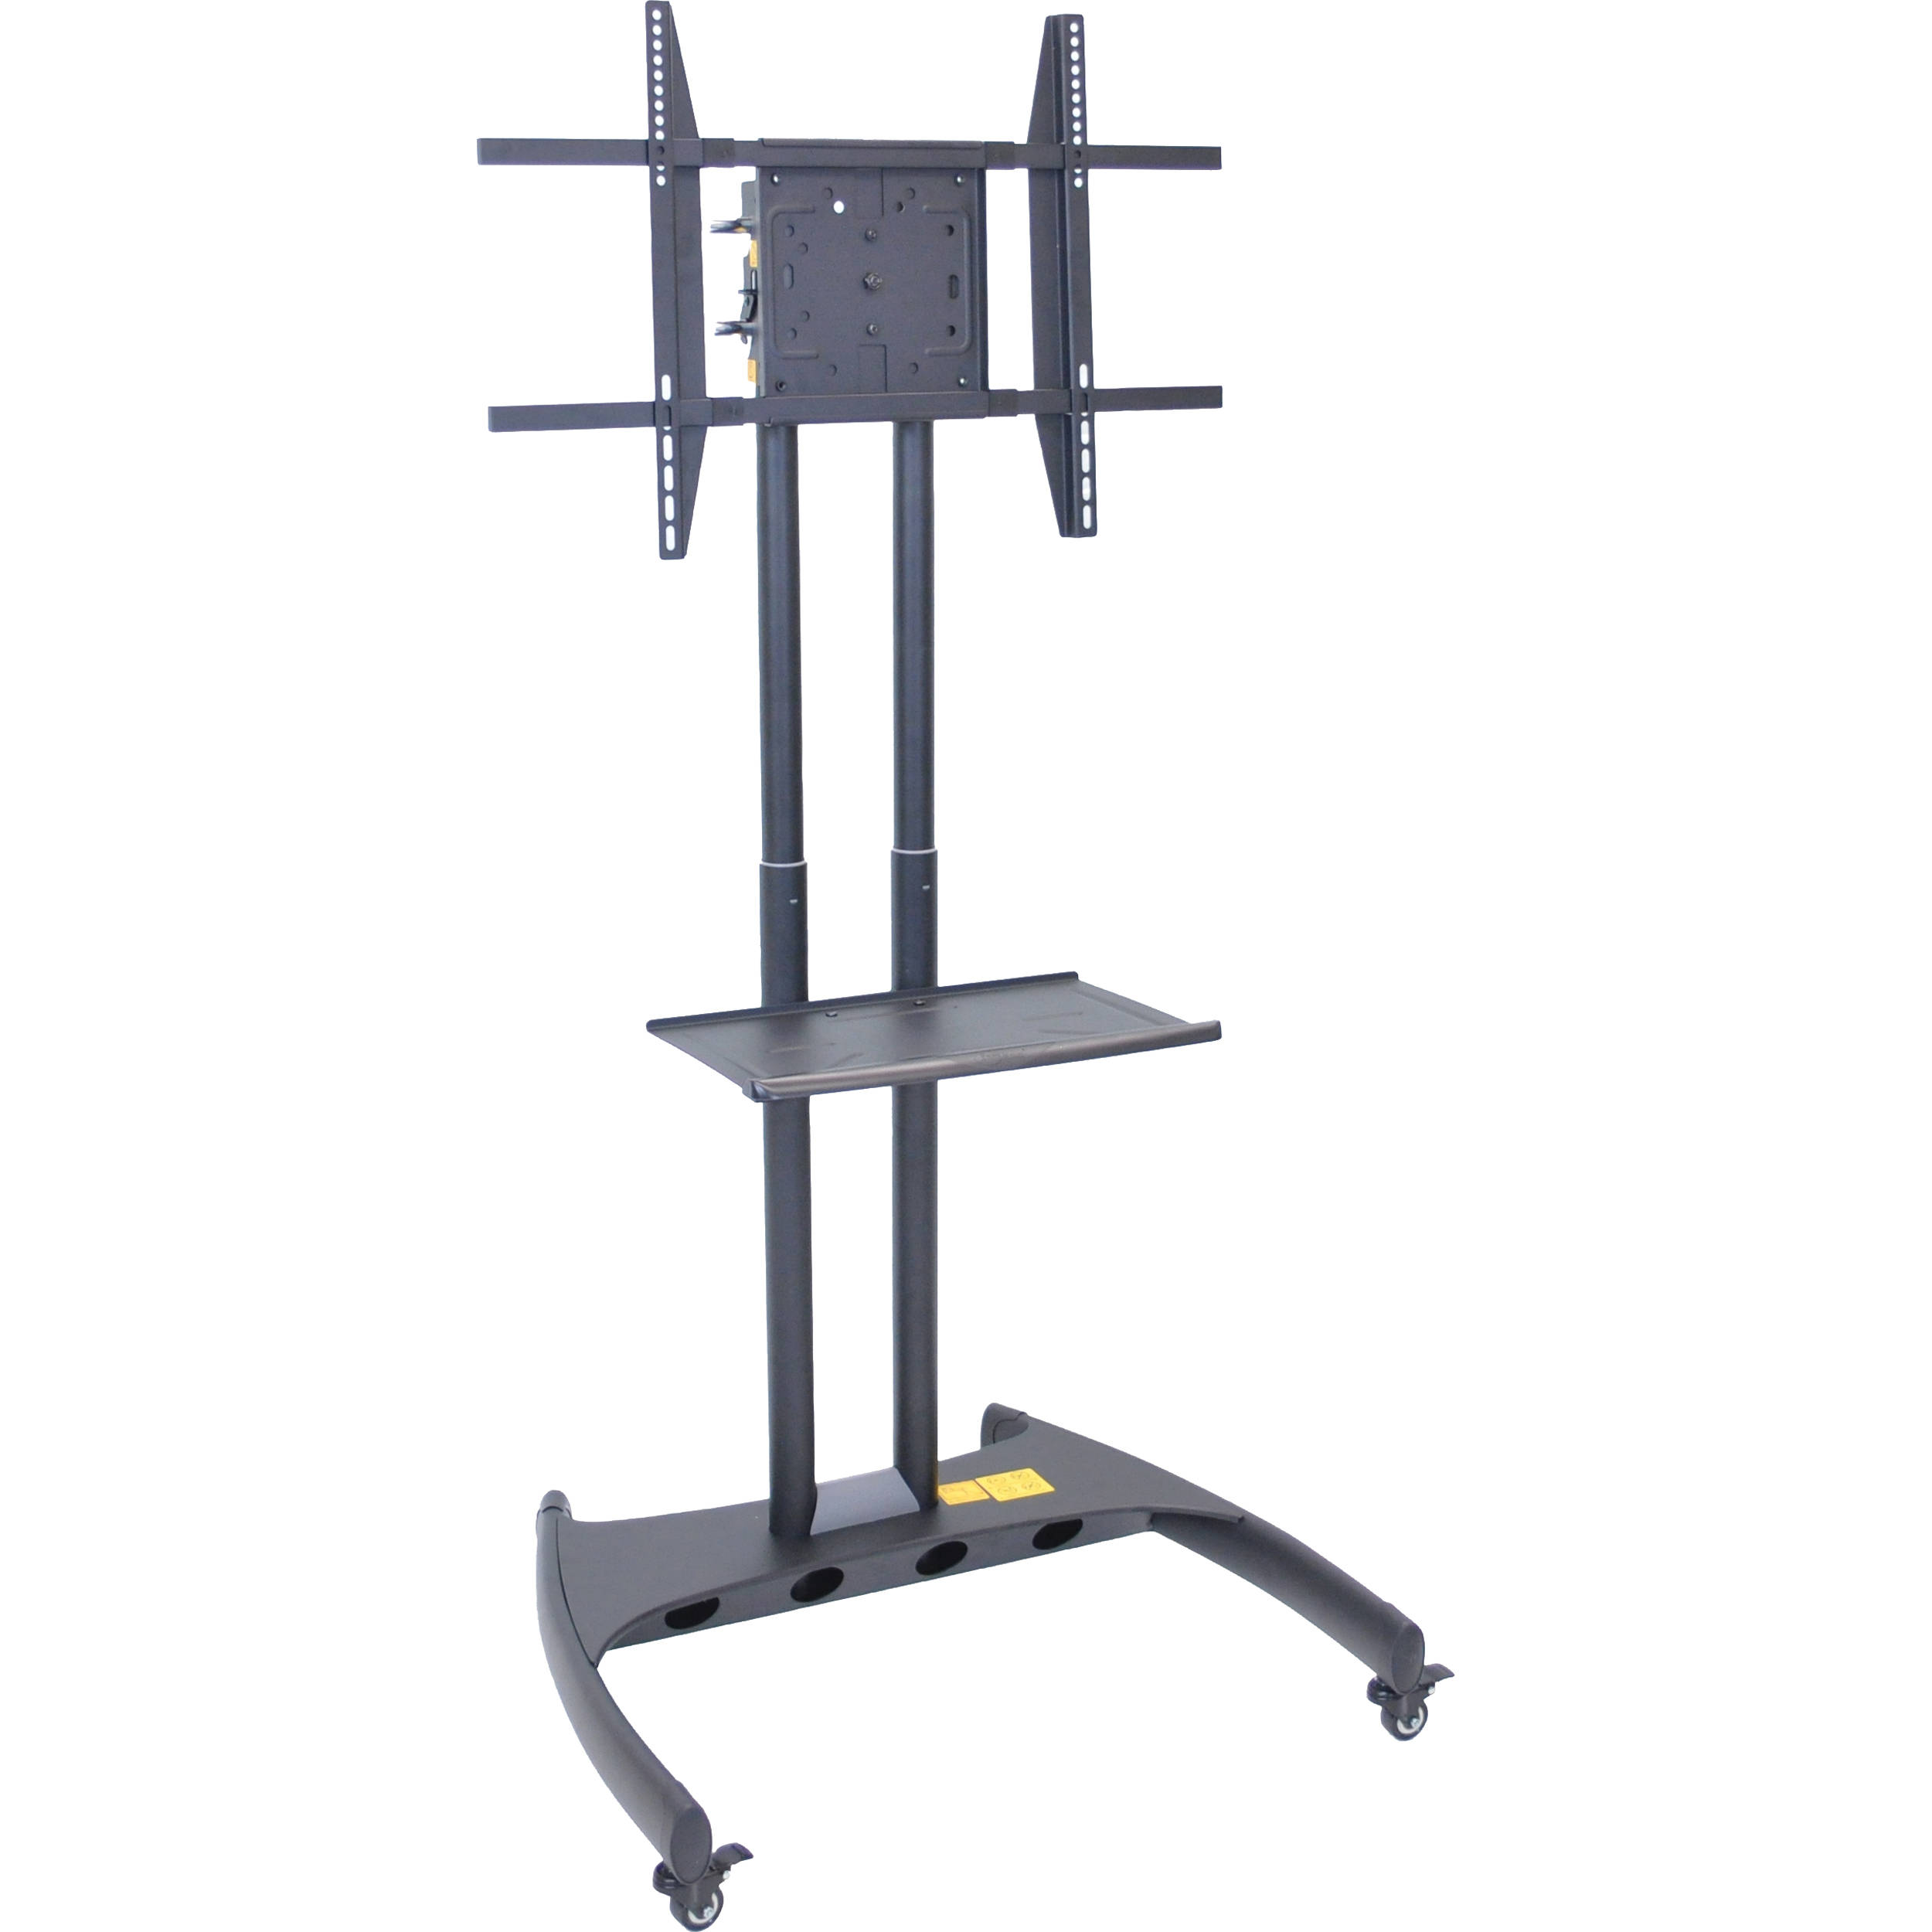 Luxor FP3500 Adjustable Height LCD TV Stand FP3500 B&H Photo